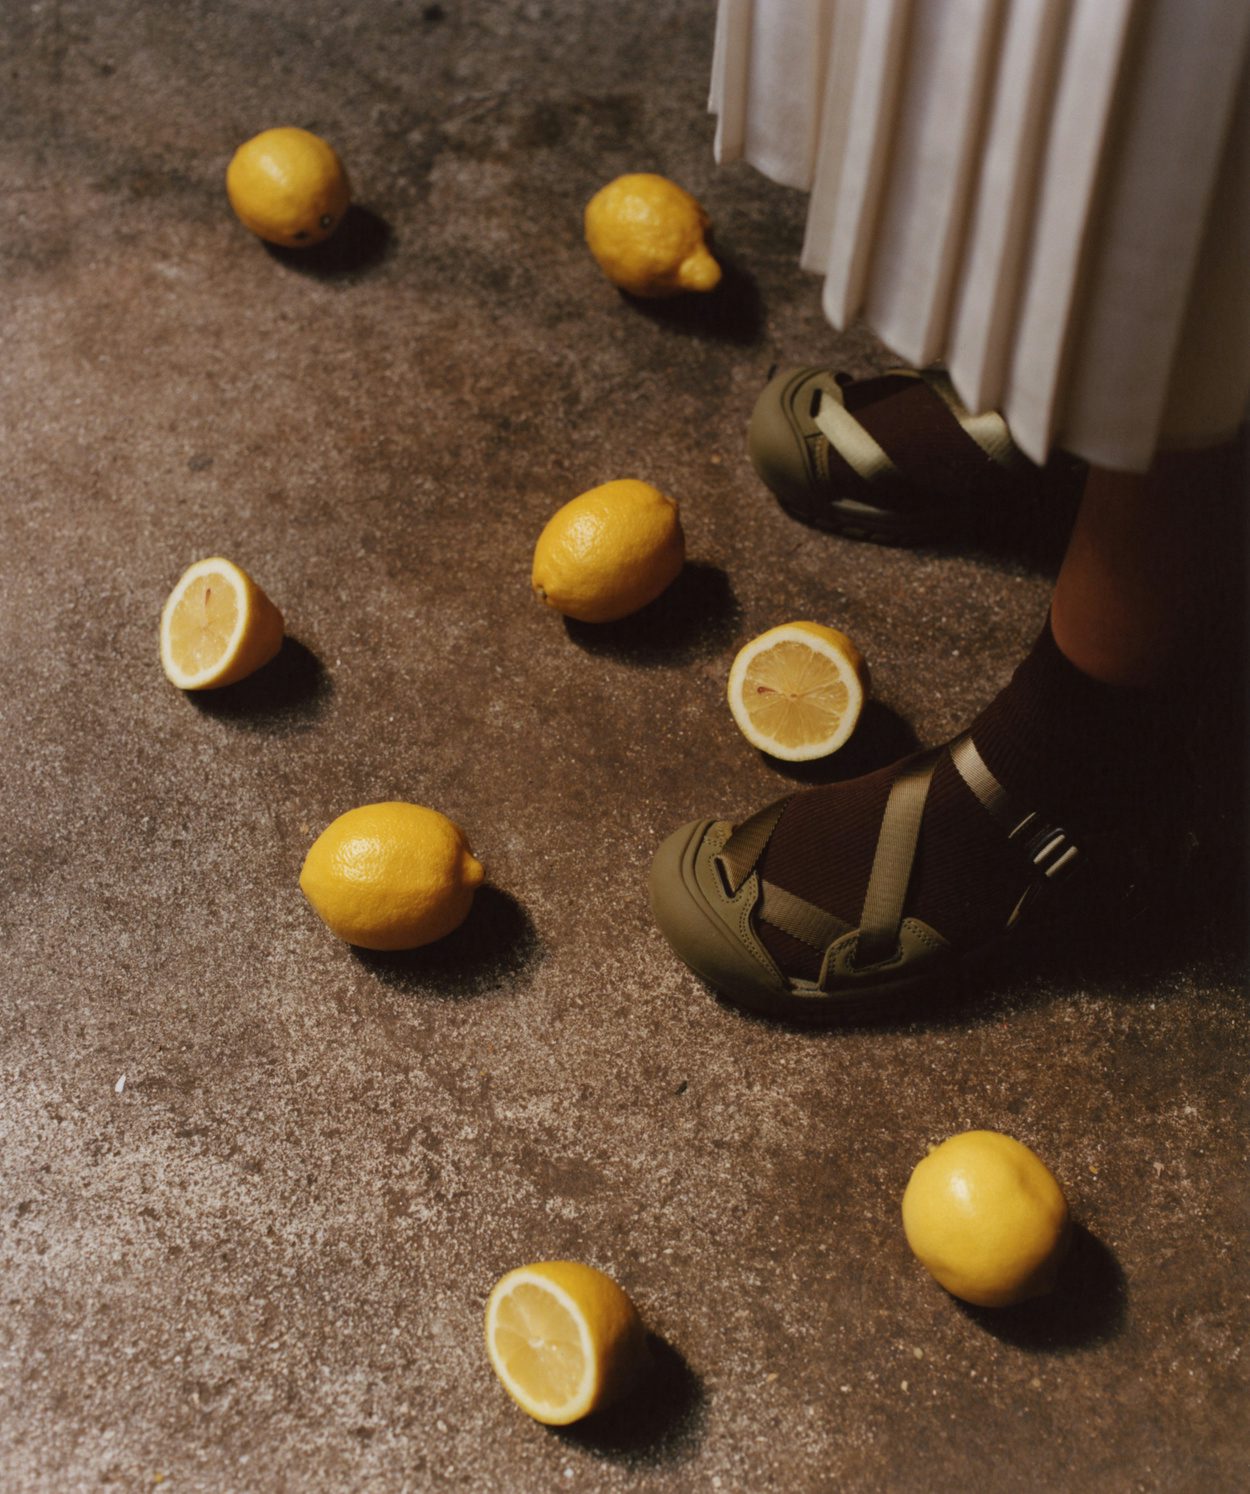 Photograph by Niall Hodson of cut lemons on the floor